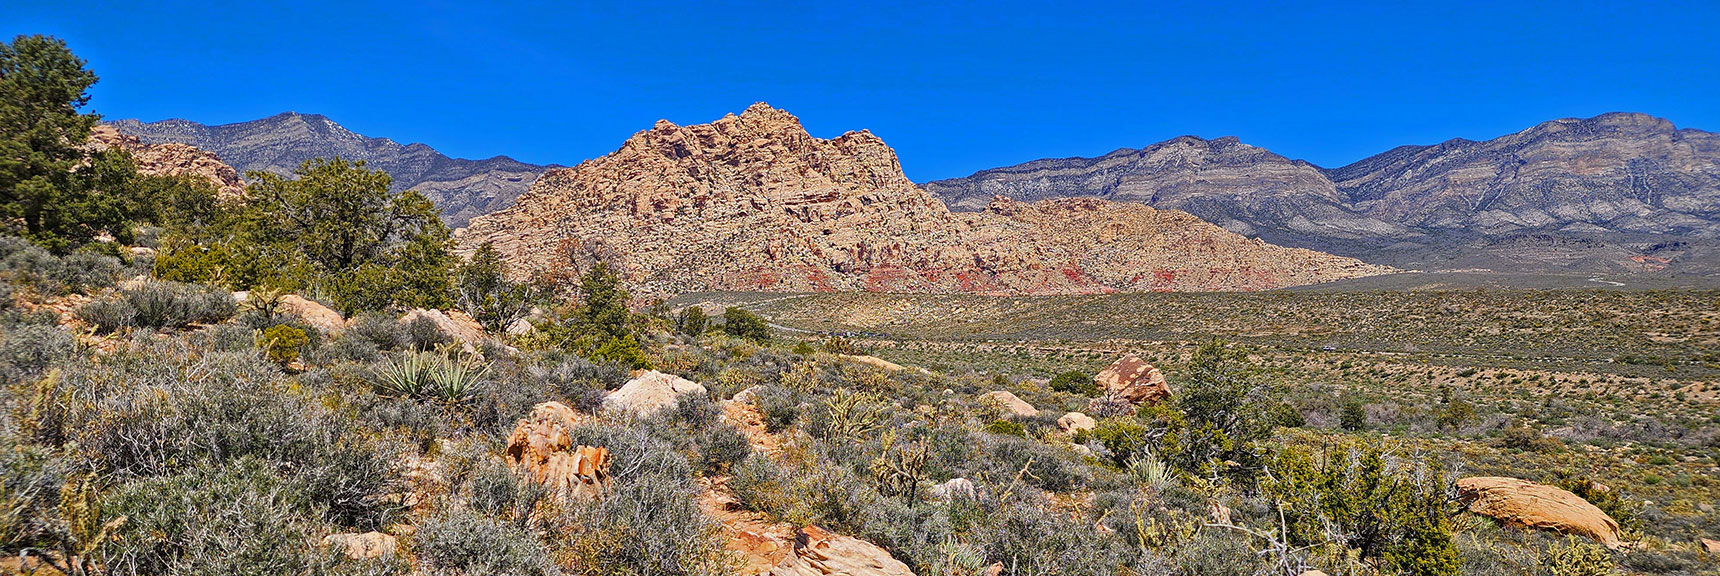 Closing in on White Rock Mountain; Ice Box Canyon Trailhead Below | Dales Trail | Red Rock Canyon National Conservation Area, Nevada | David Smith | LasVegasAreaTrails.com